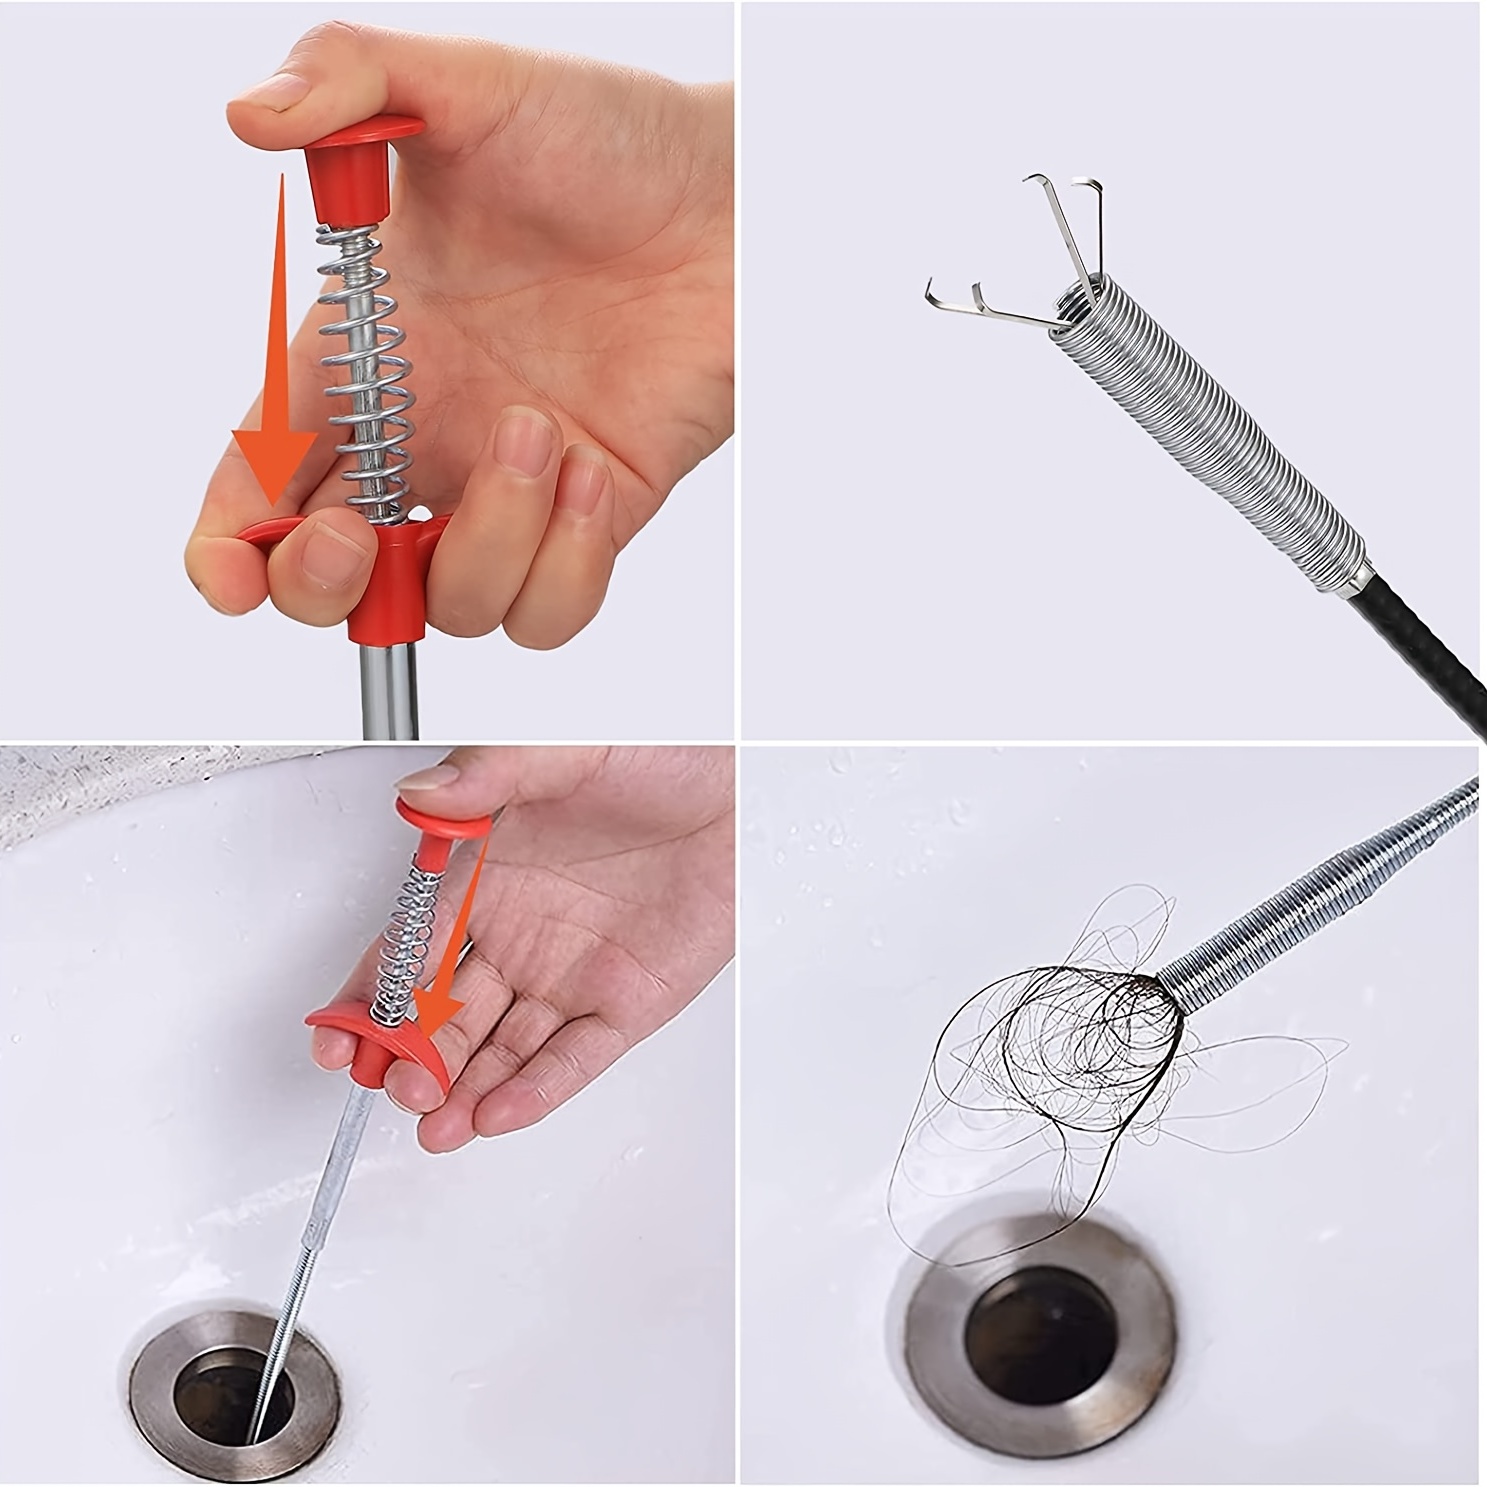 Domejo Flexible Grabber Claw Pick Up Reacher Tool with 4 Claws Bendable Hose Pickup Reaching Assist Tool for Litter Pick, Home Sink, Drains, Toilet (